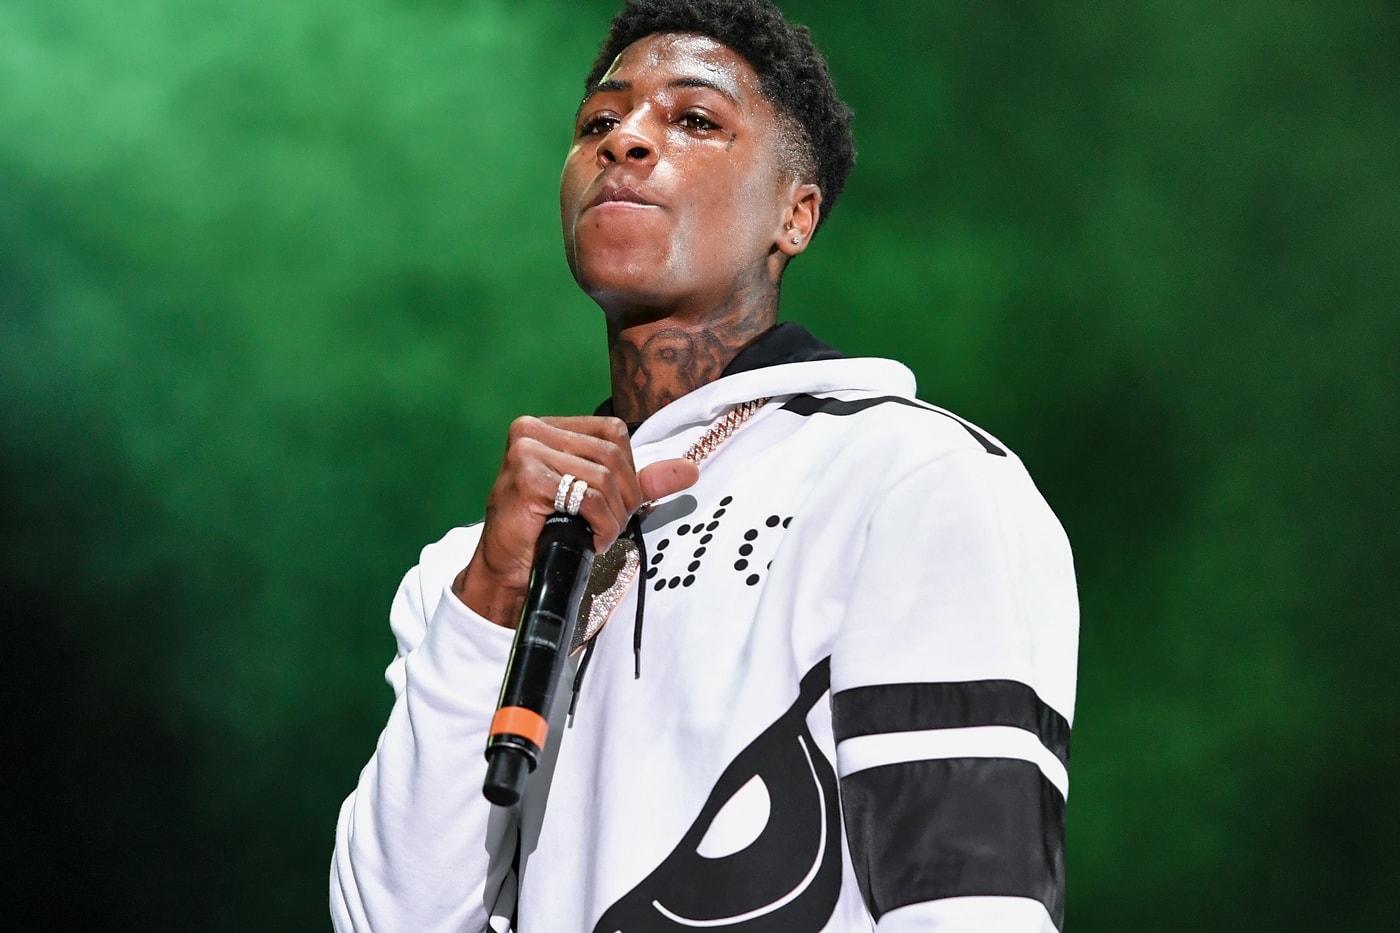 nba youngboy never broke again 4freedom ep stream new mixtape project 2018 series drawing symbols listen run in here change we dem august